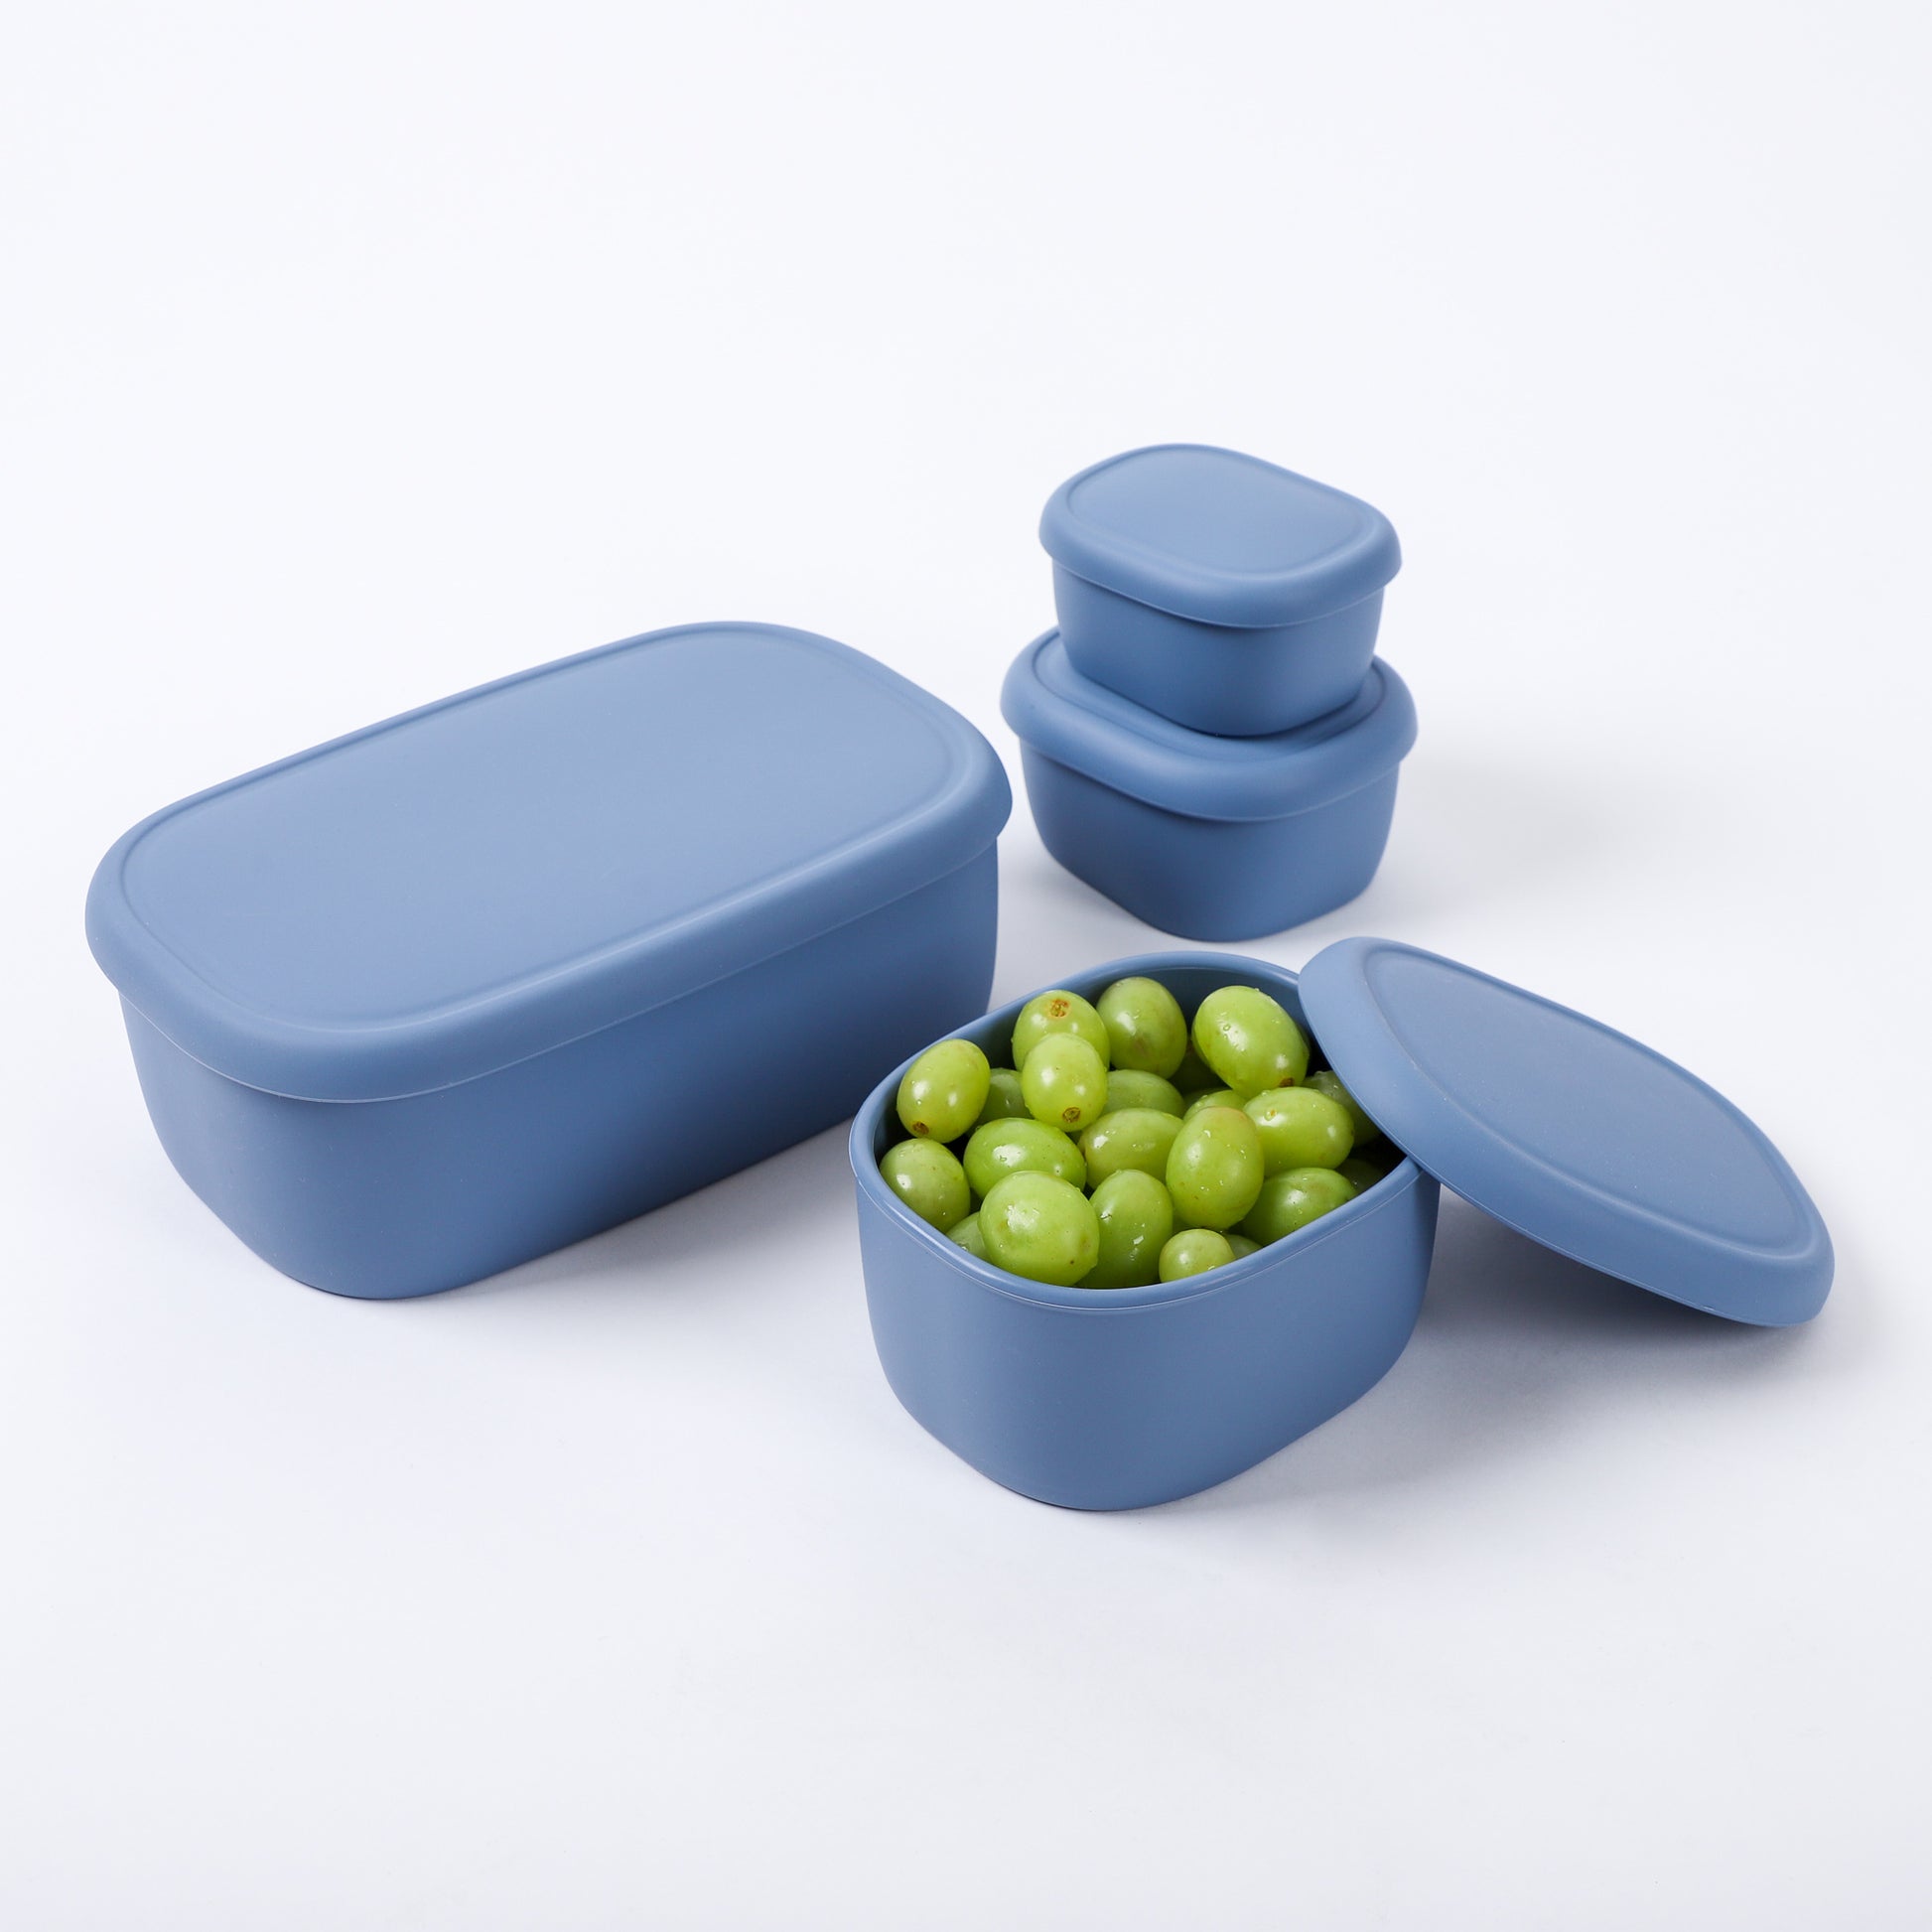 Tupperware Stacking Square Storage Set - Dishwasher Safe & BPA Free - (6  Clear Containers + 6 Blue Lids): Home & Kitchen 